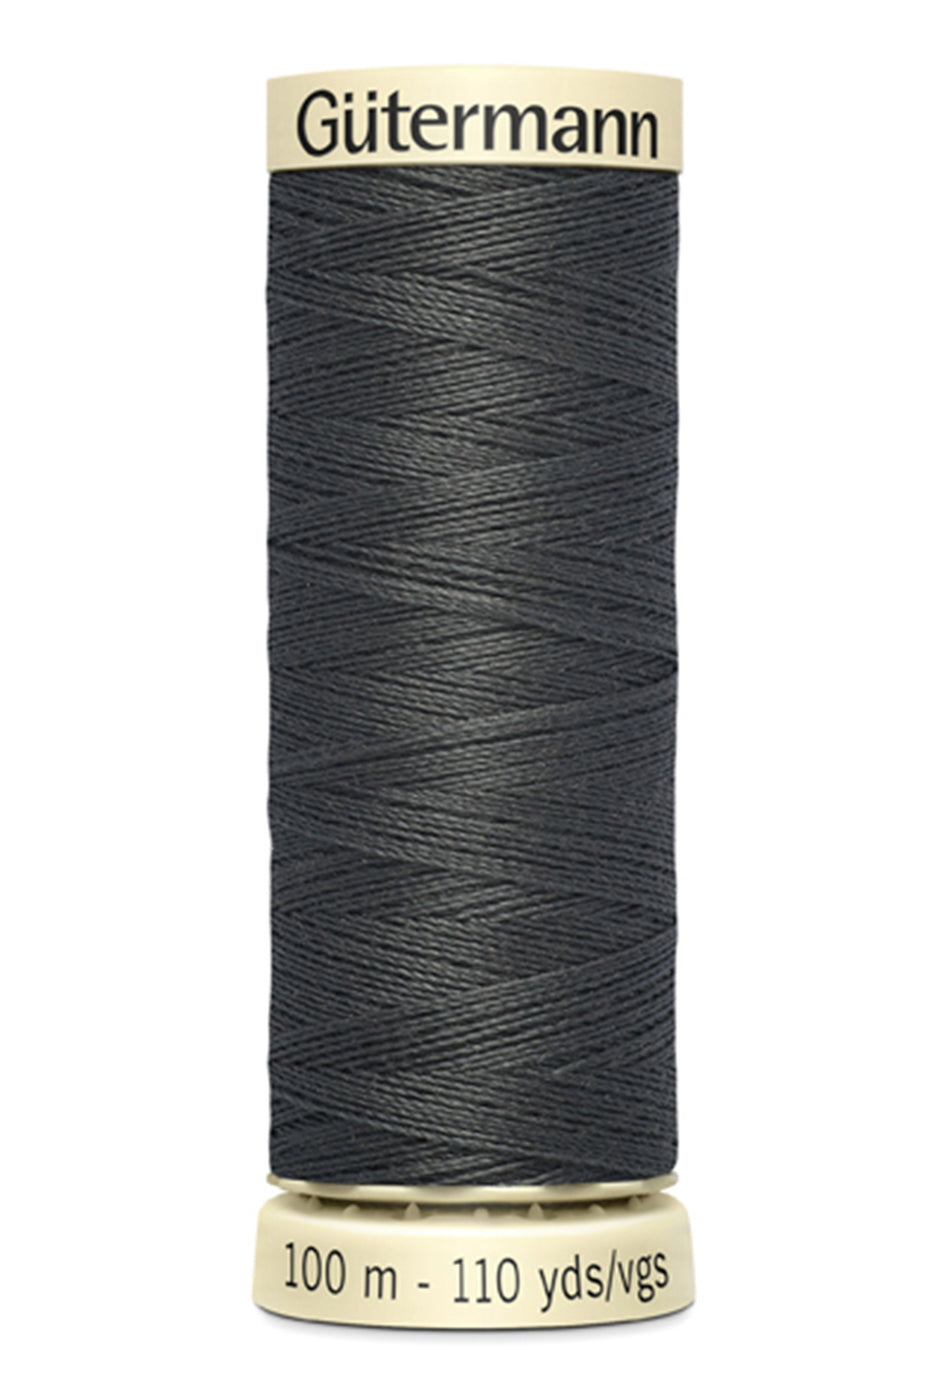 Gutermann Sew-All Polyester 125 Charcoal 100m/110yd